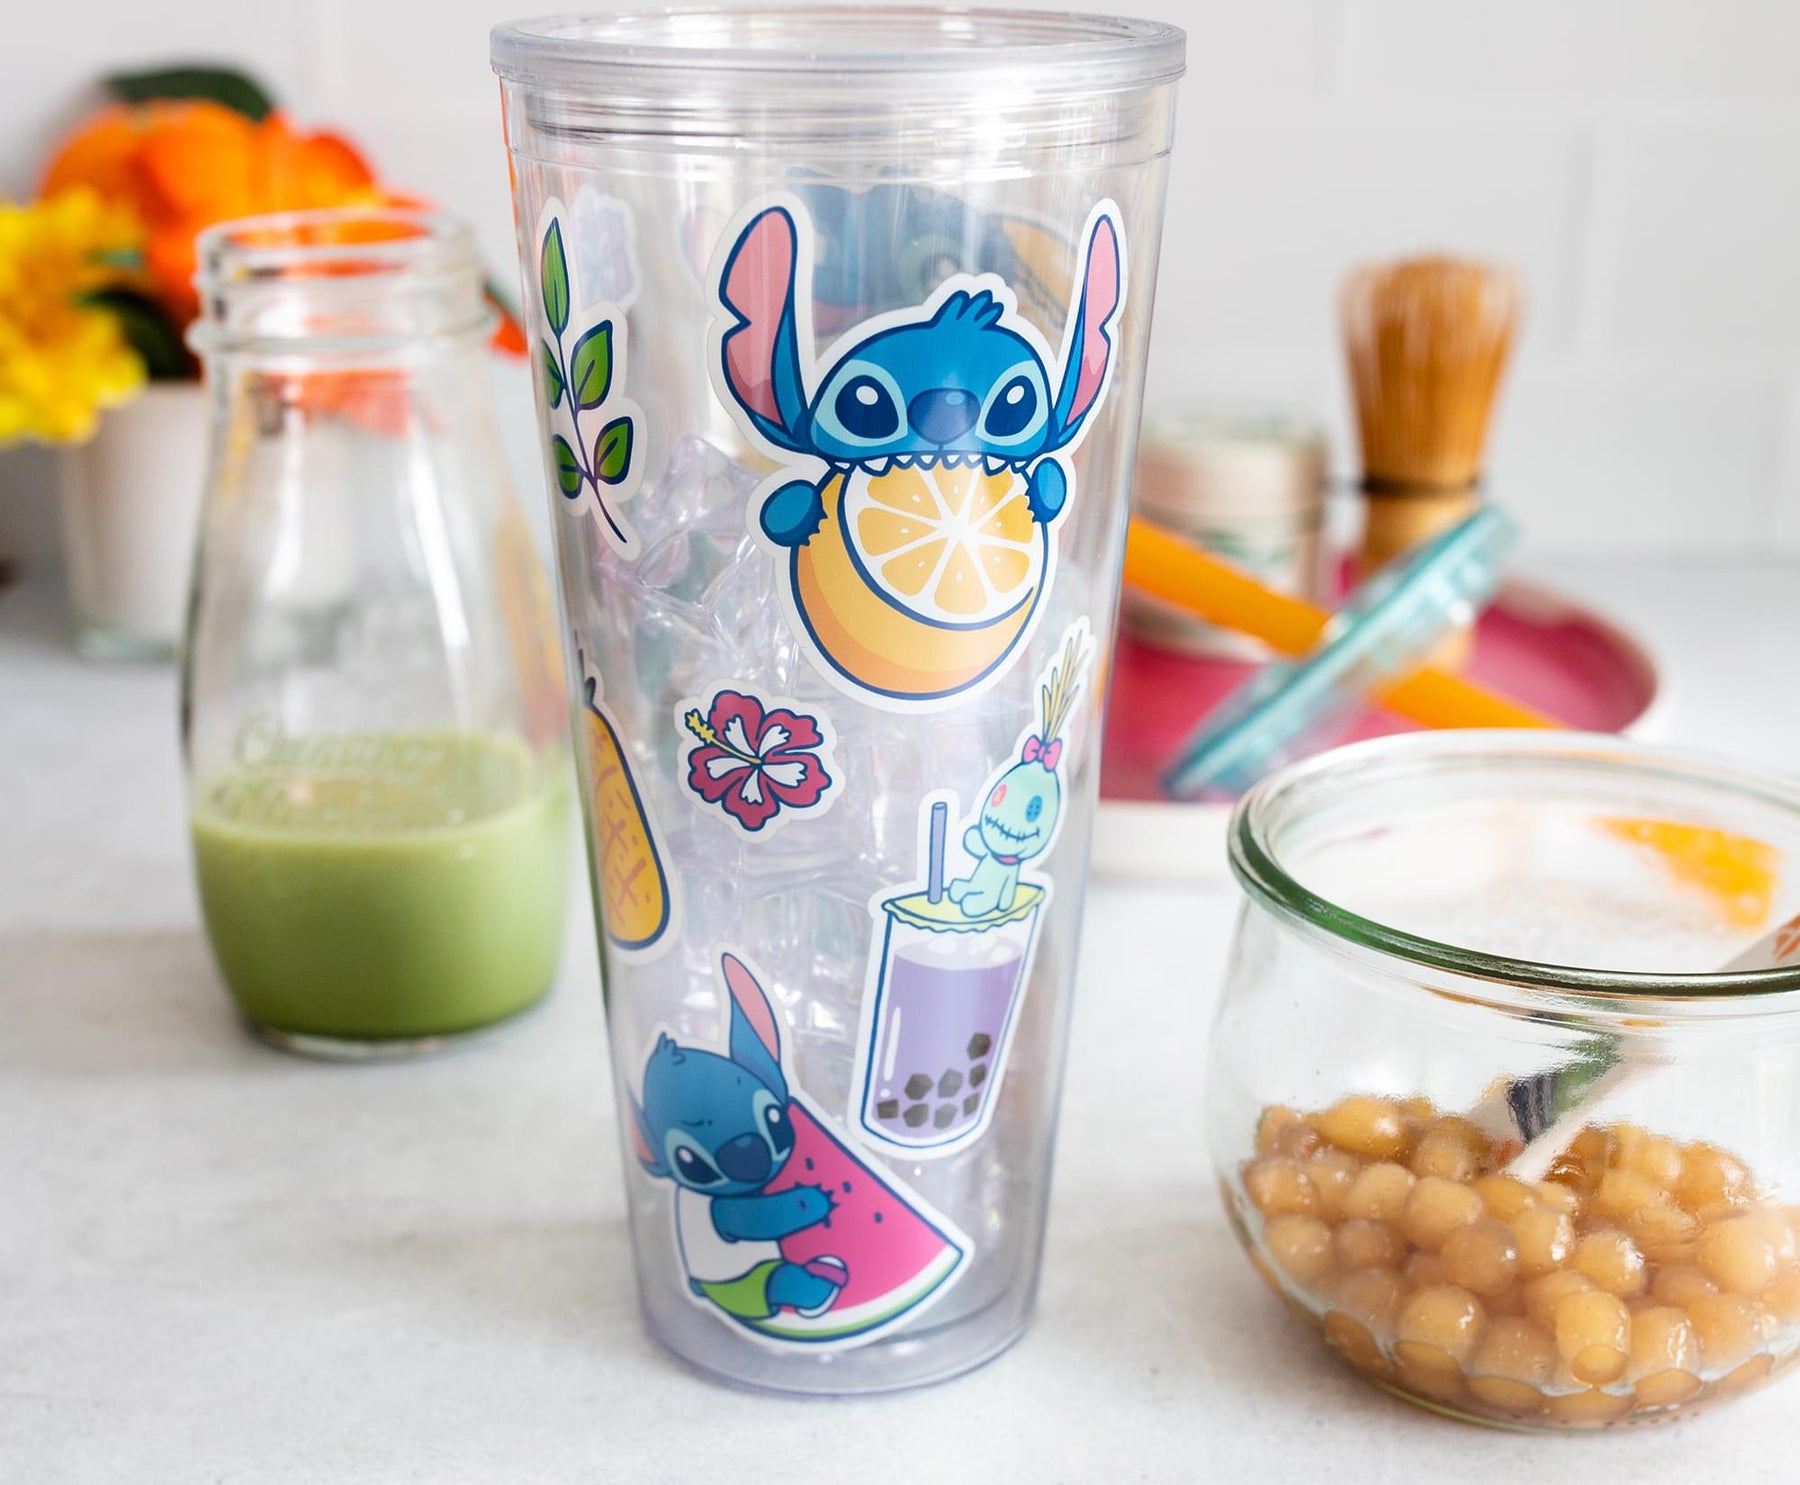 Silver Buffalo Lilo and Stitch Pastel Snack Toss Plastic Boba Tumbler w Lid  and Straw, 24 Ounces